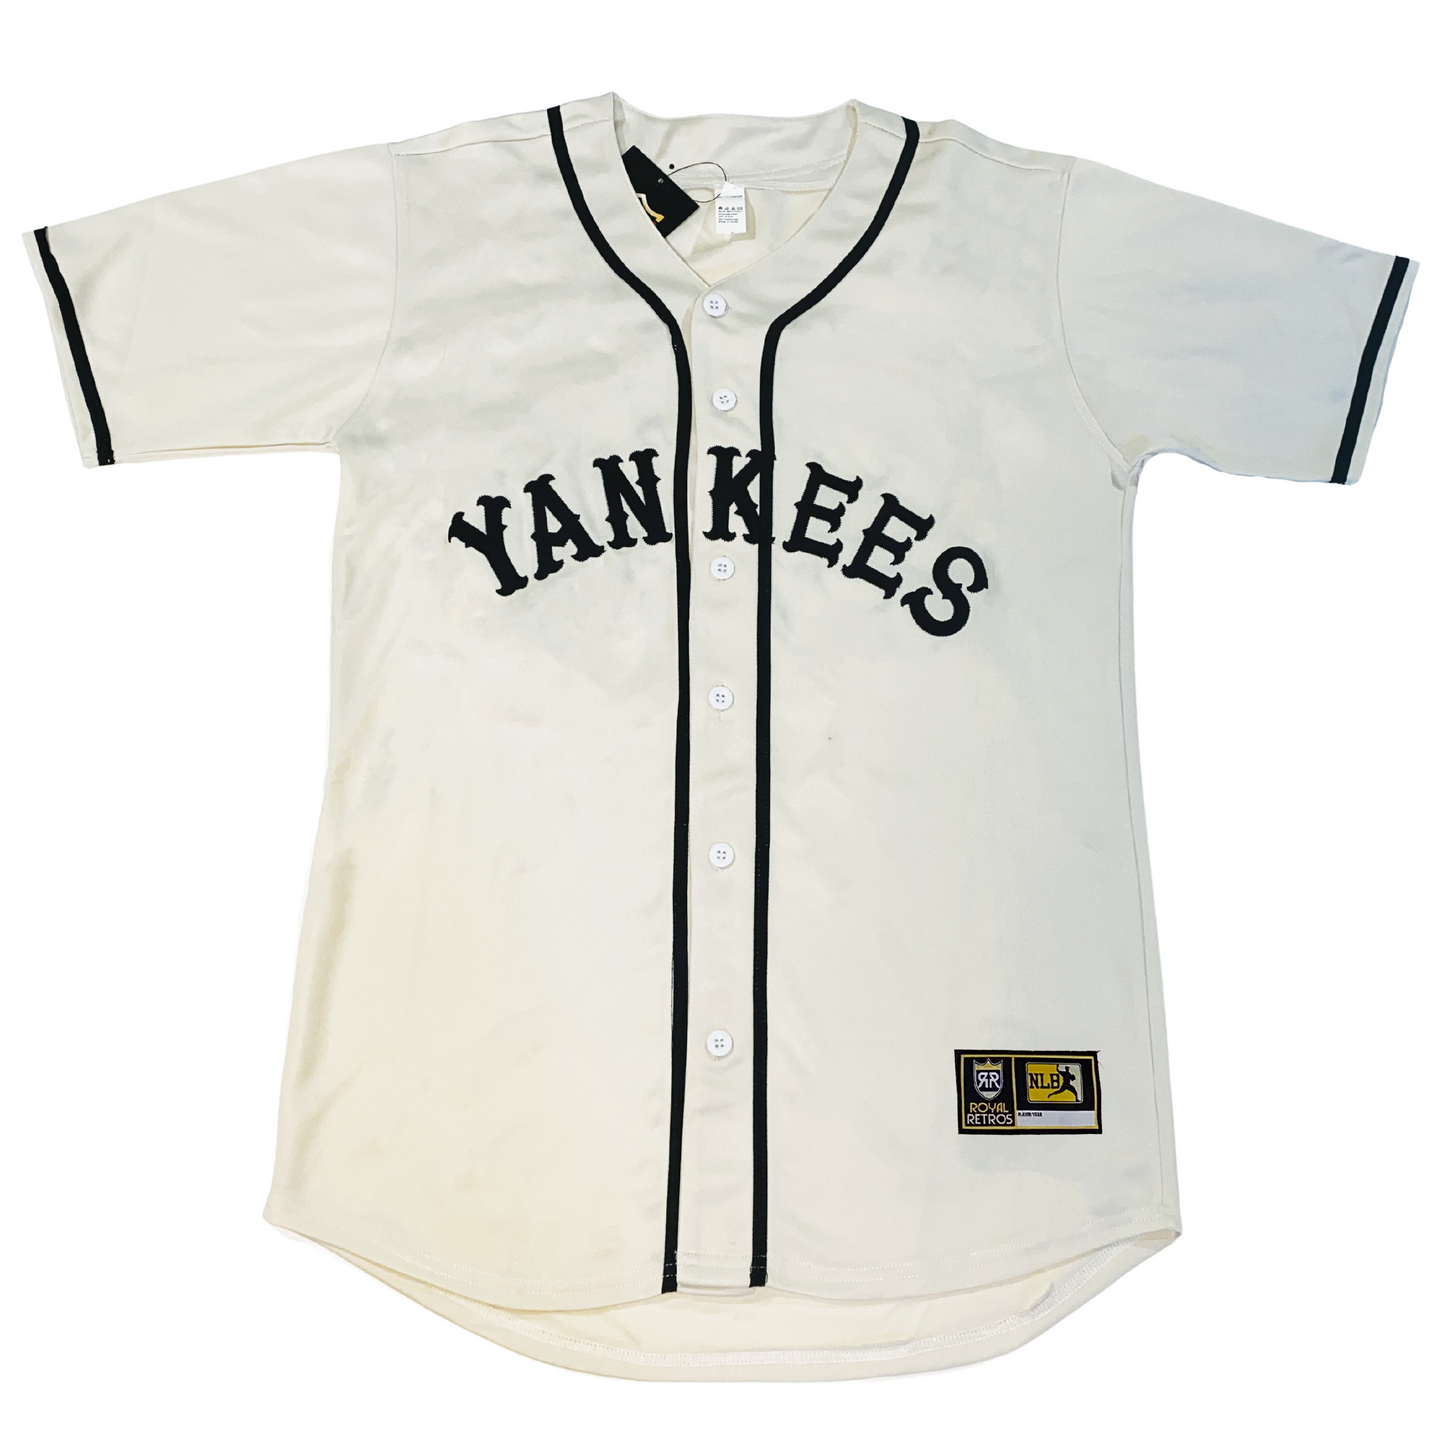 yankees all black jersey